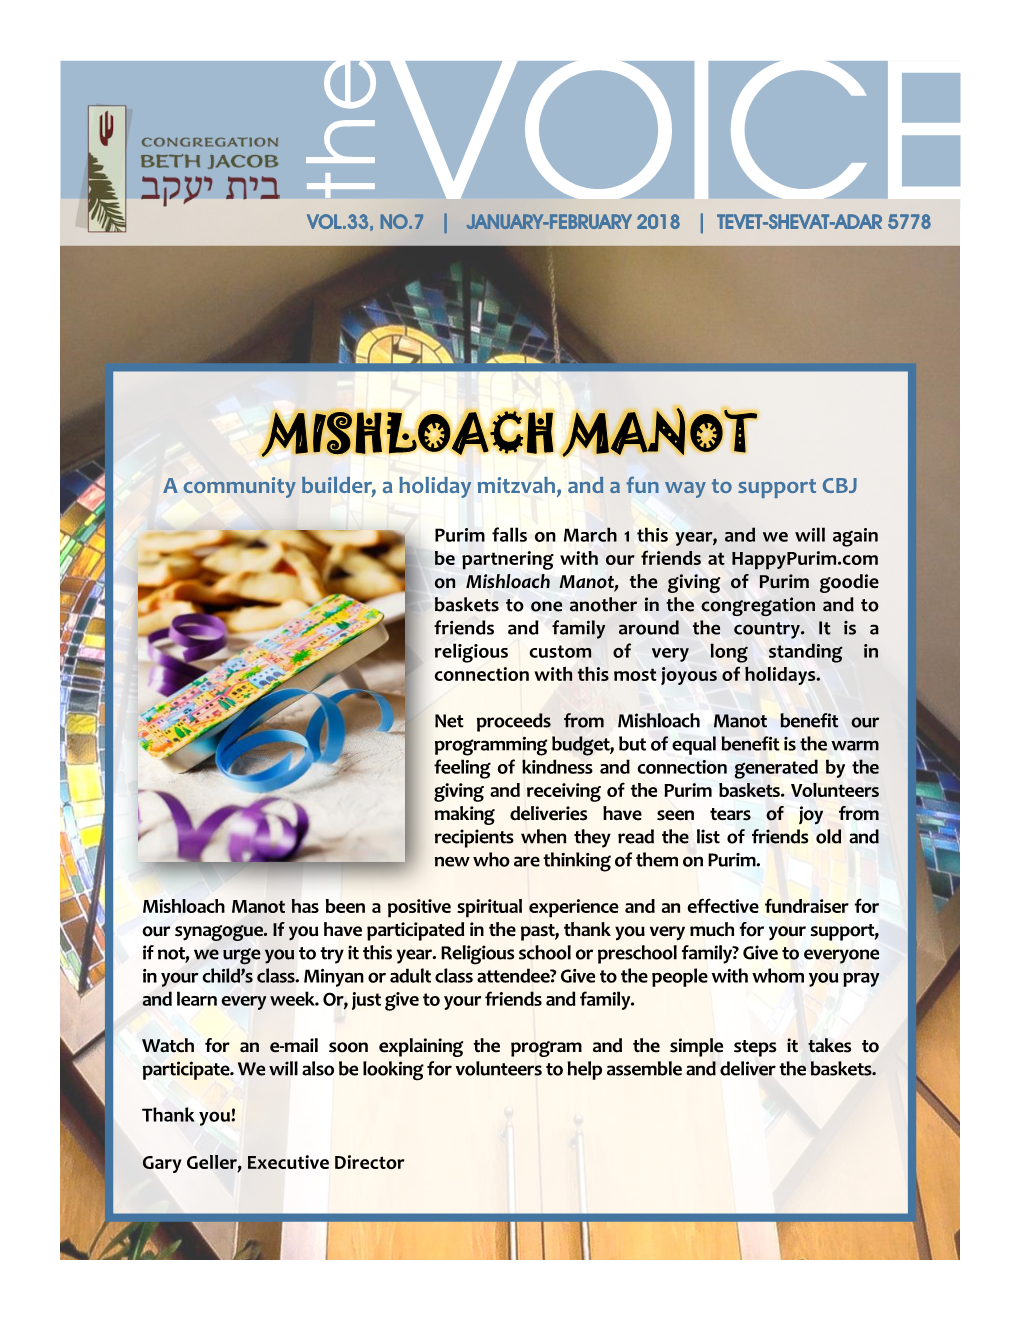 MISHLOACH MANOT a Community Builder, a Holiday Mitzvah, and a Fun Way to Support CBJ